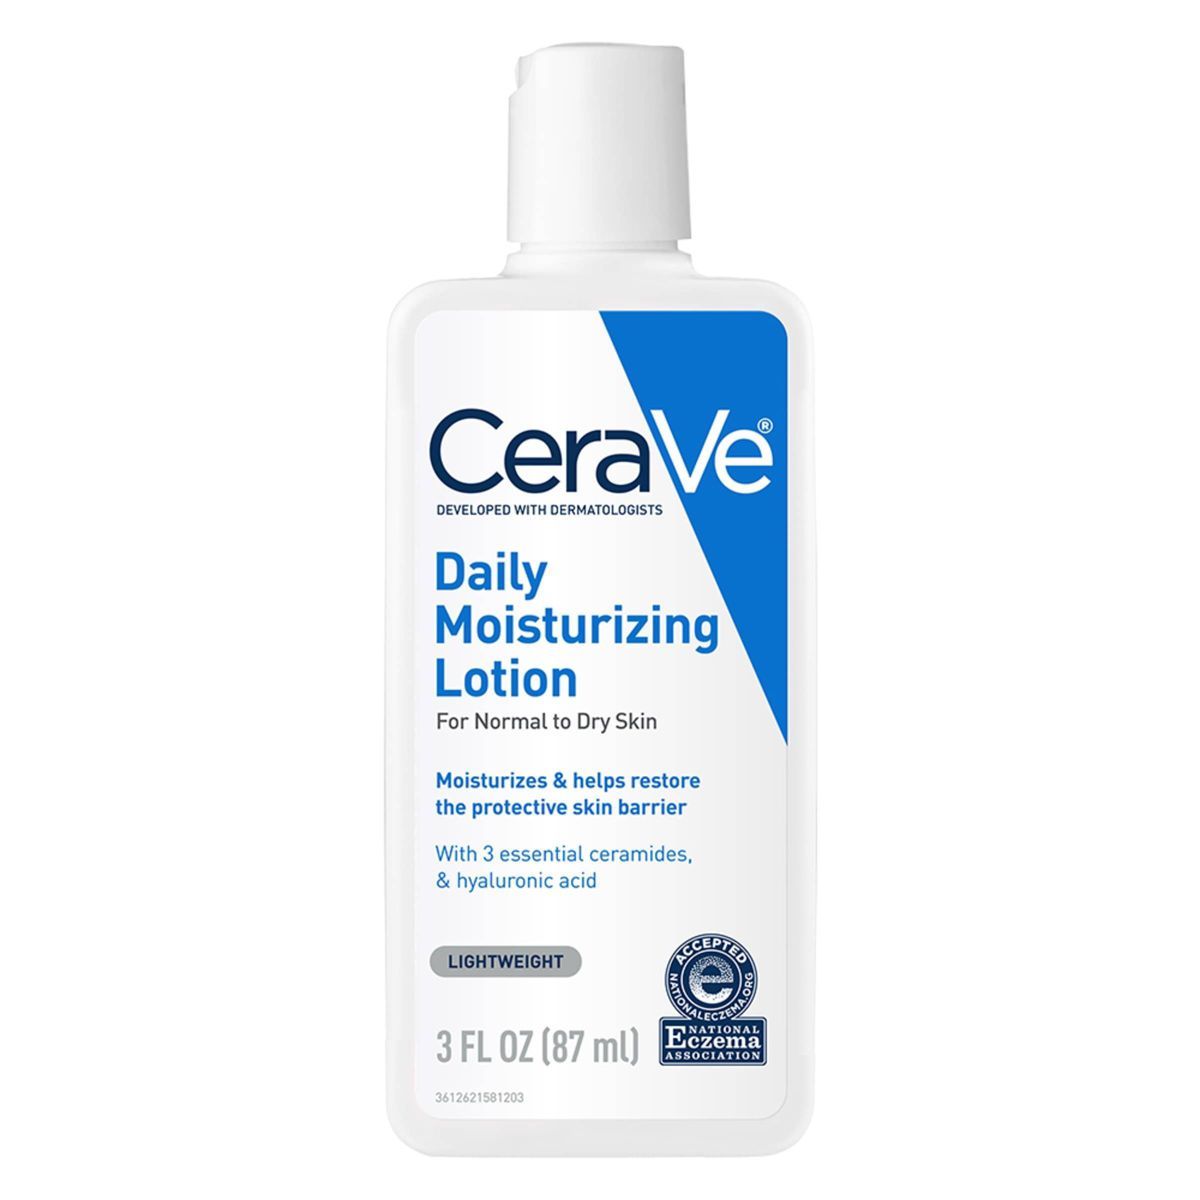 CeraVe Daily Moisturizing Face and Body Lotion for Normal to Dry Skin | Target